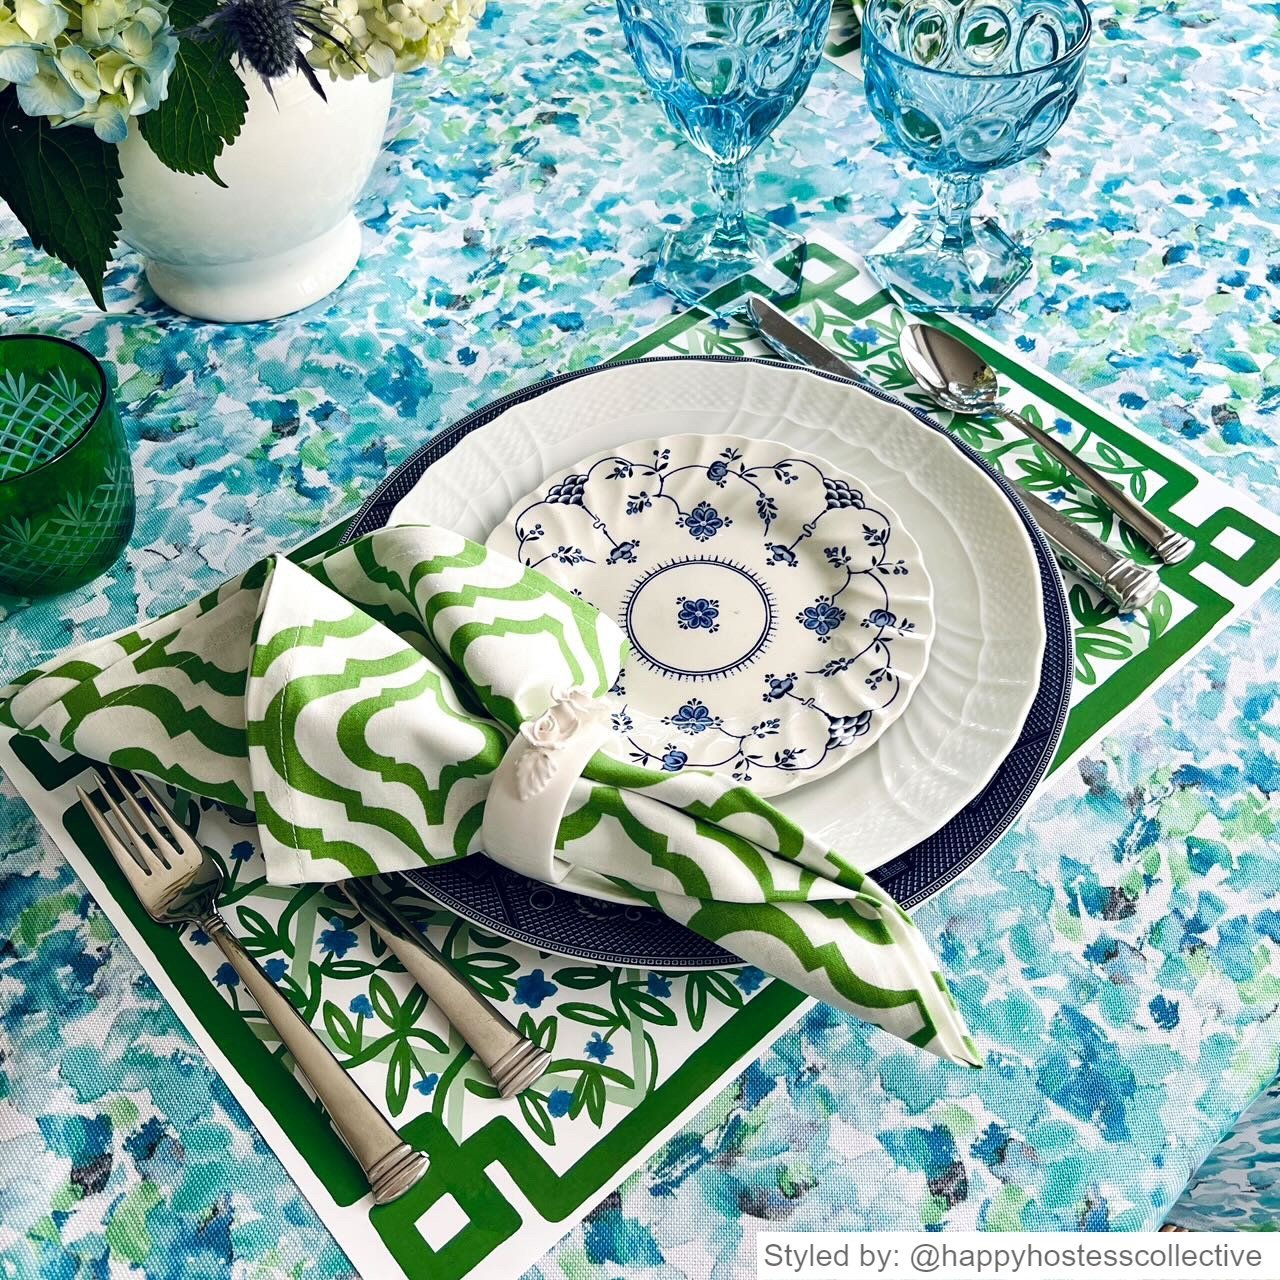 Place setting with a green and white paper placemat layered with blue and white dishes and a green and white napkin on a blue and white tablecloth